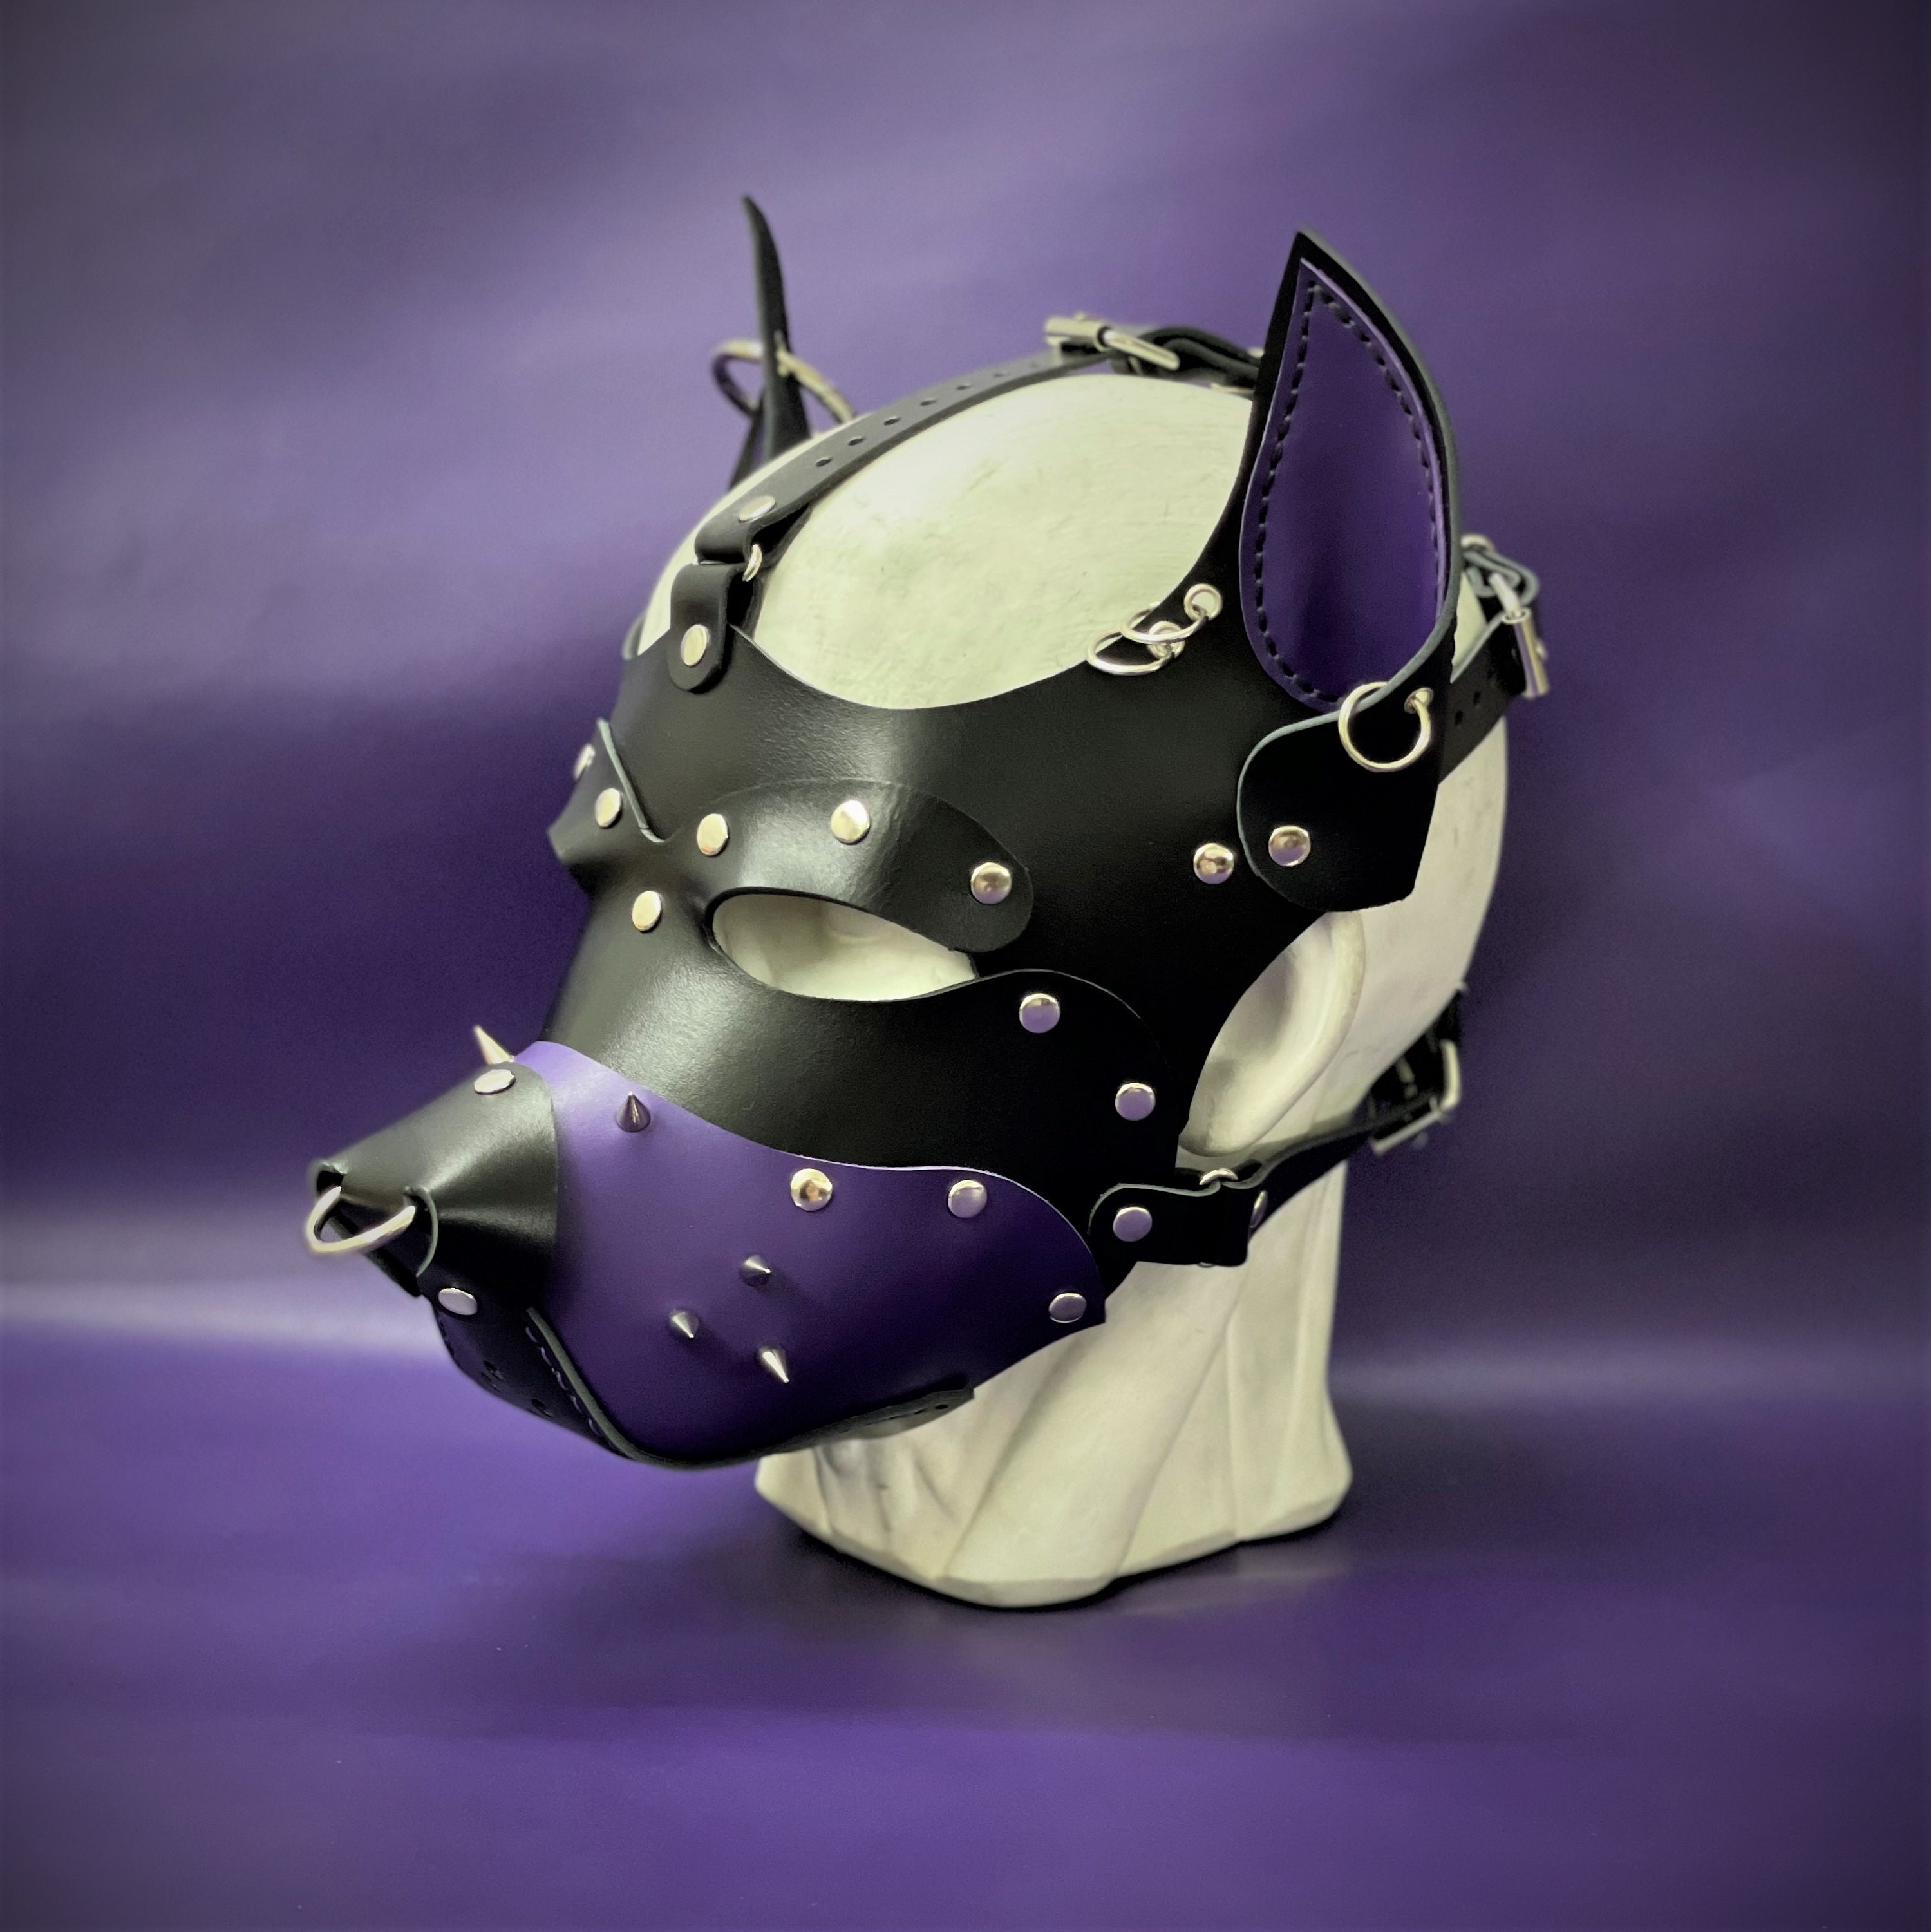 Leather Dog Mask With Spikes and Rings Leather Puppy Mask - Etsy